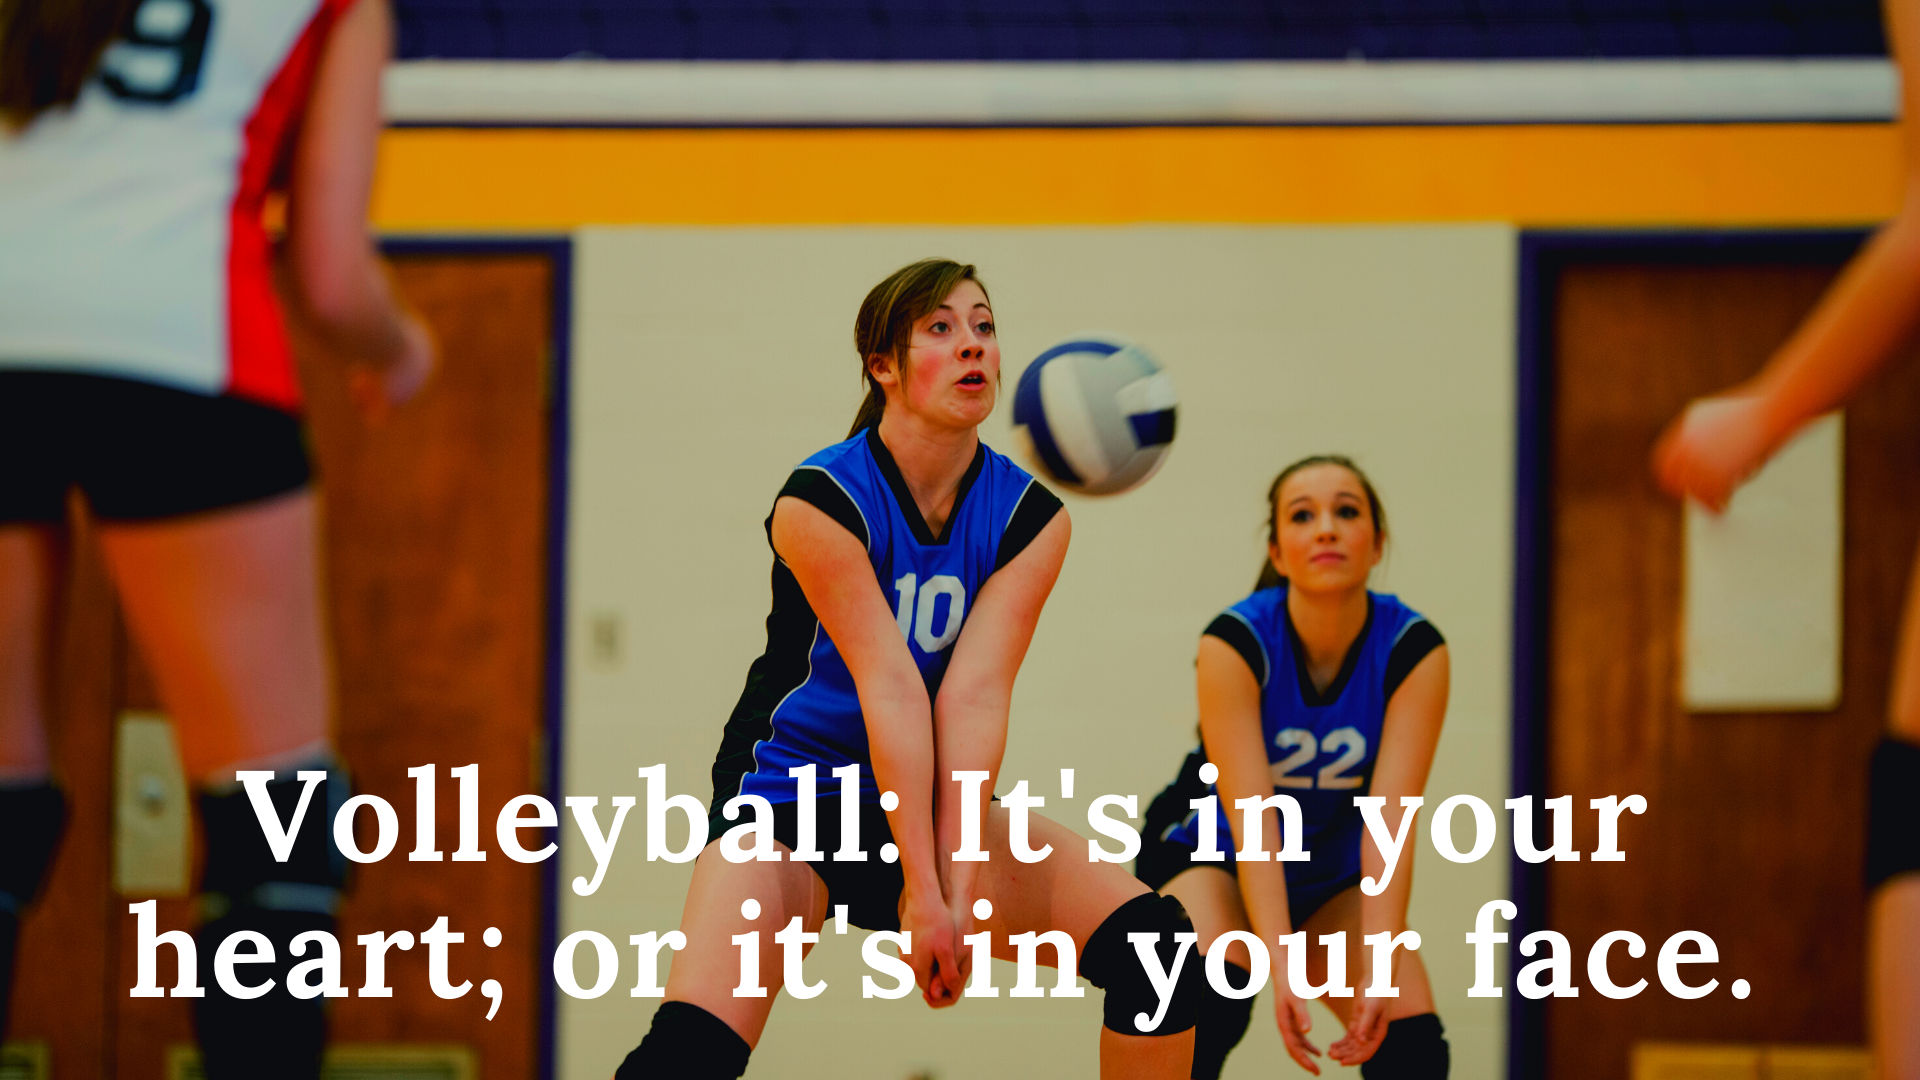 Best Inspirational Volleyball Quotes & Sayings | Quotes for Volleyball